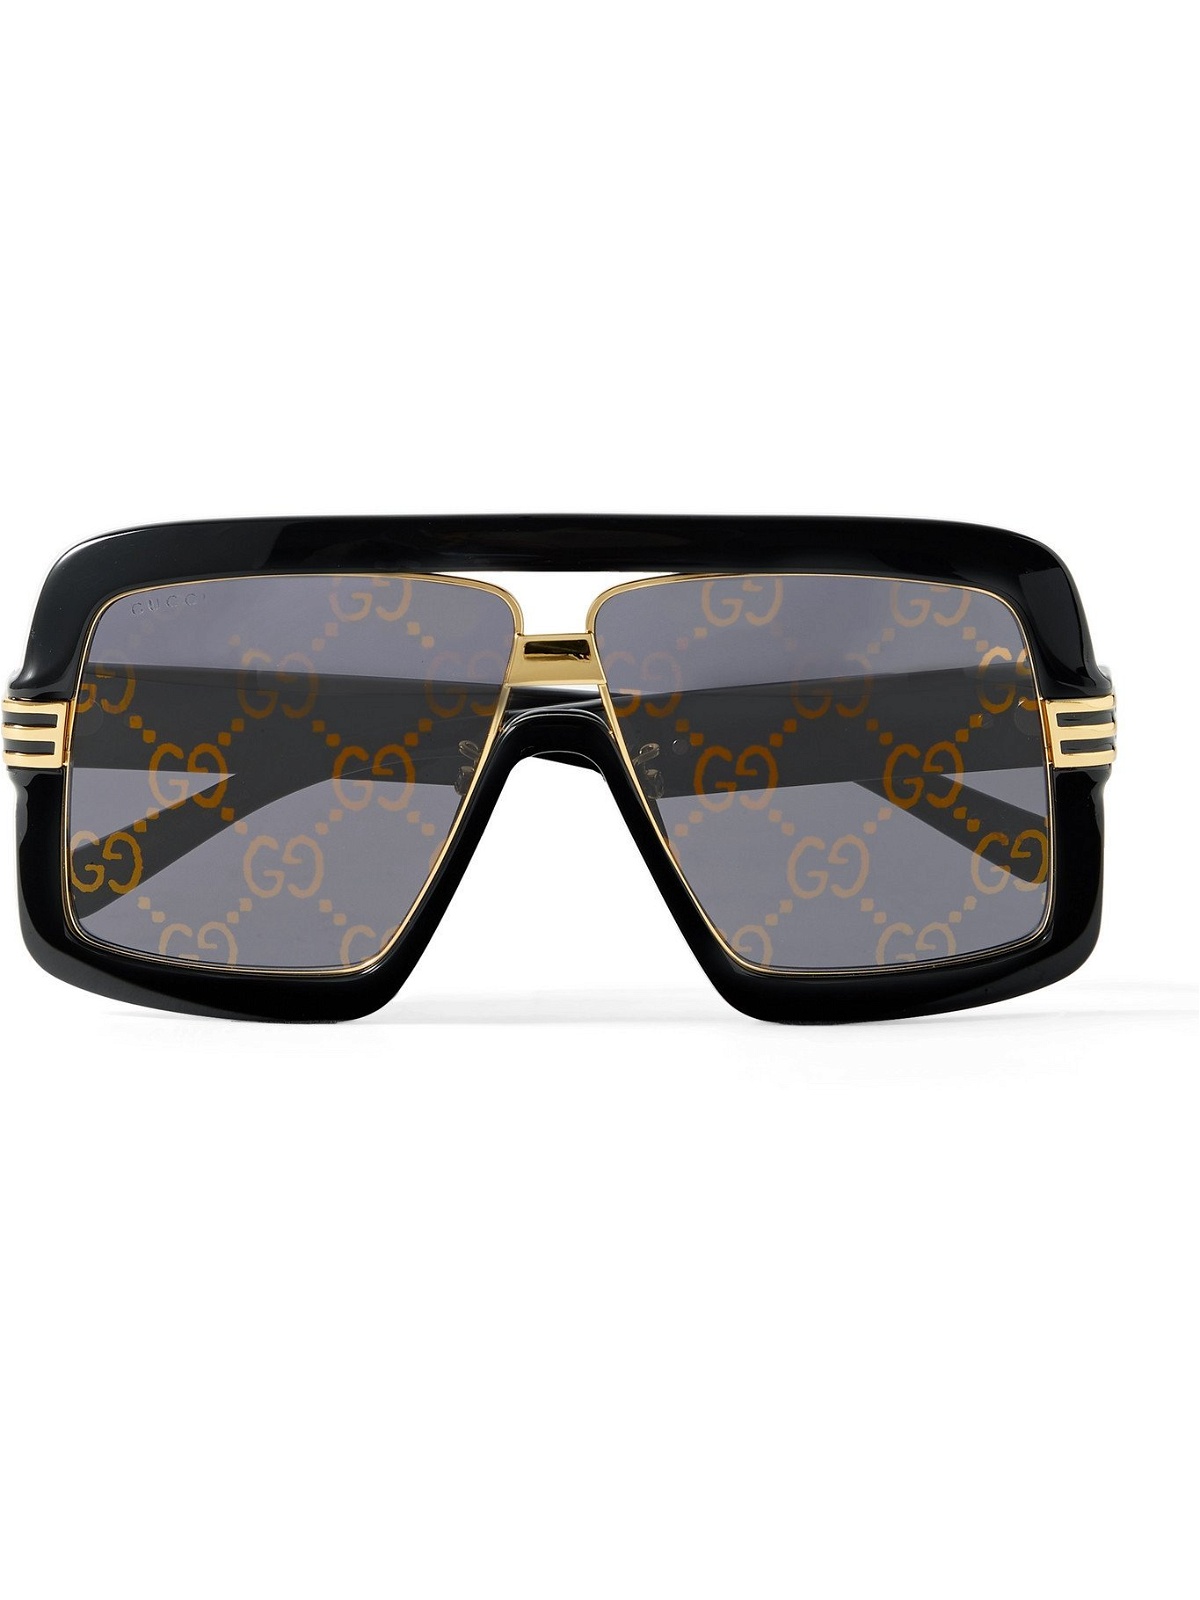 GUCCI EYEWEAR GG Chaise Lounge square-frame acetate sunglasses |  NET-A-PORTER